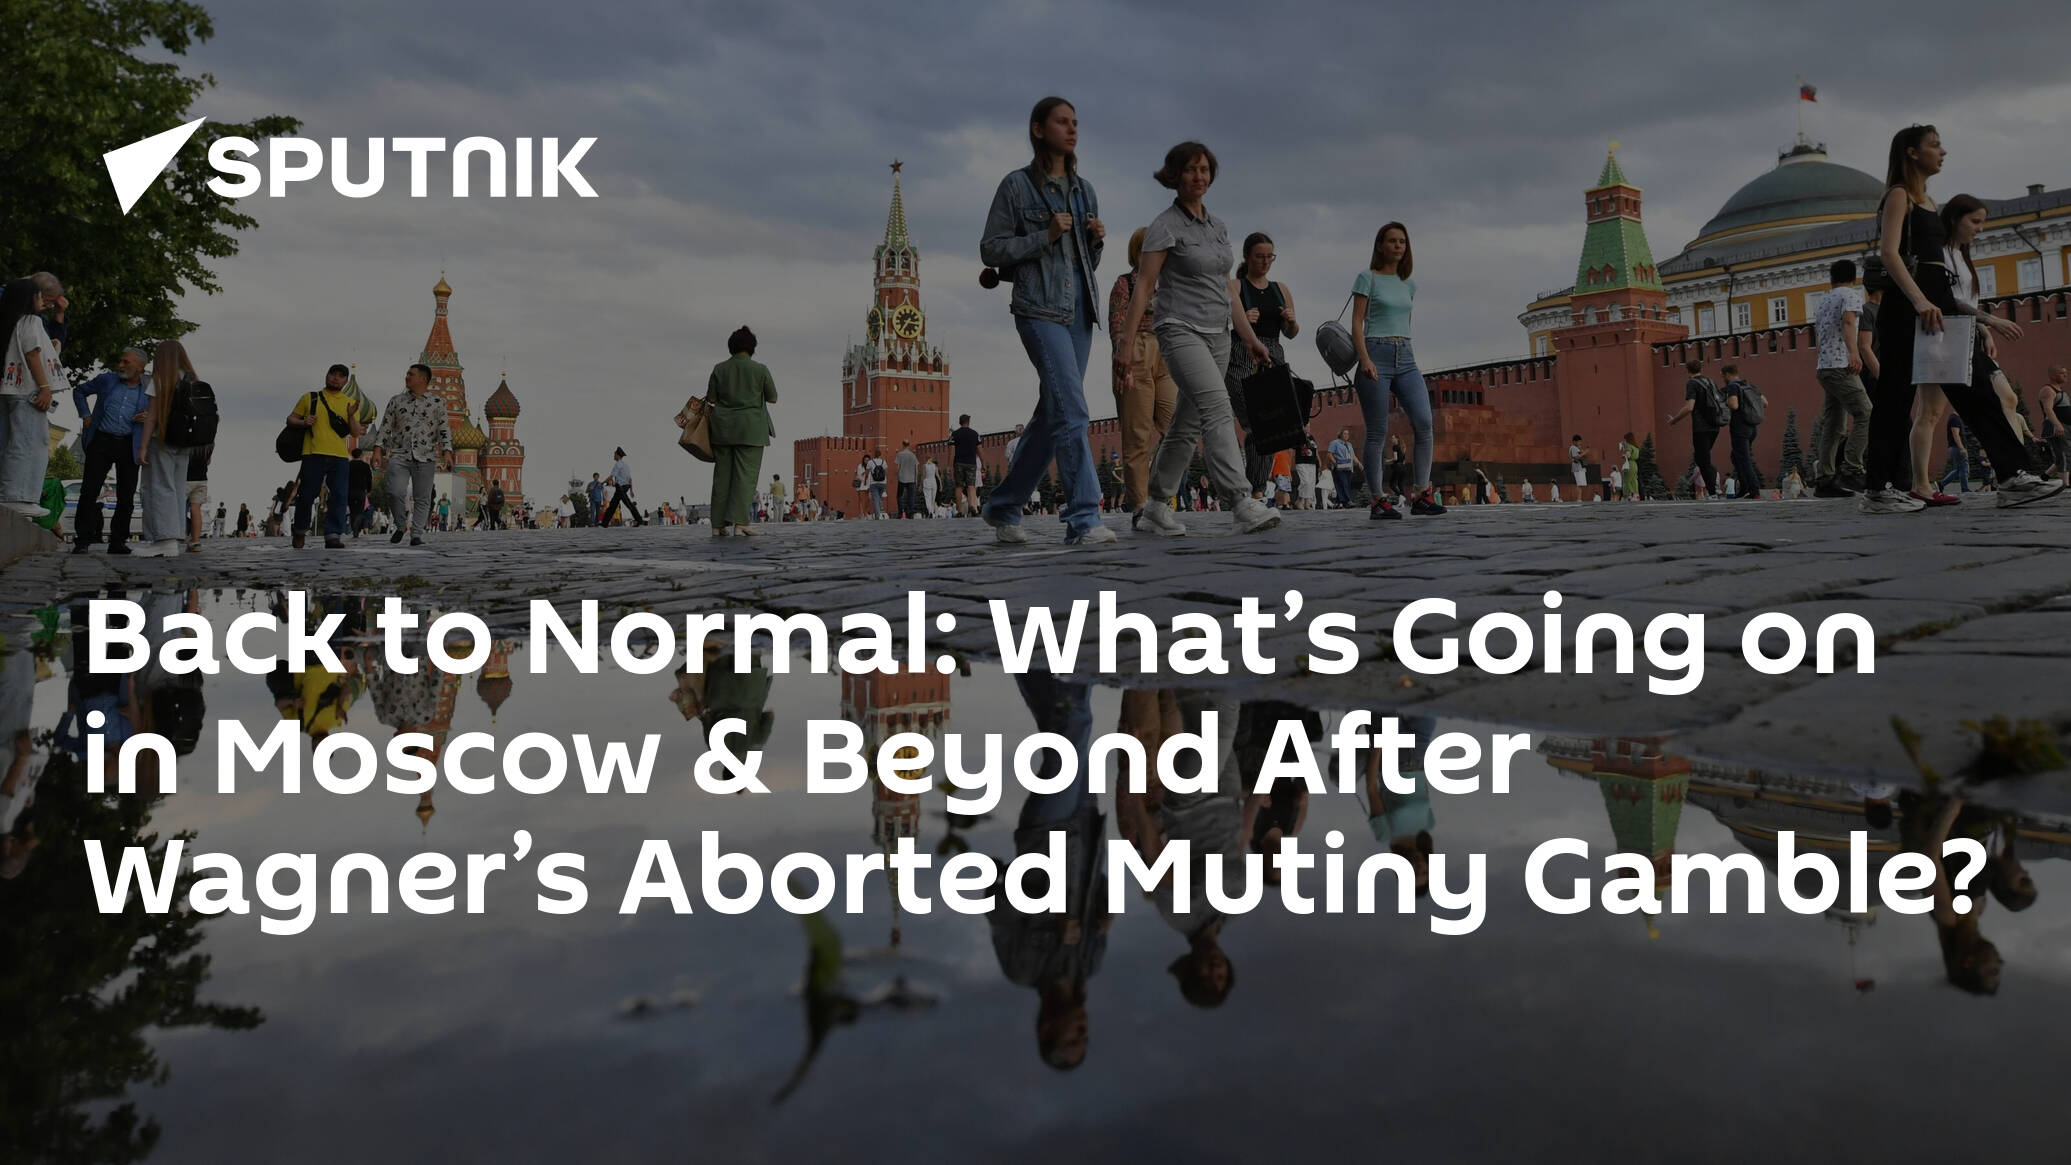 Back to Normal: What’s Going on in Moscow & Beyond After Wagner’s Aborted Mutiny Gamble?